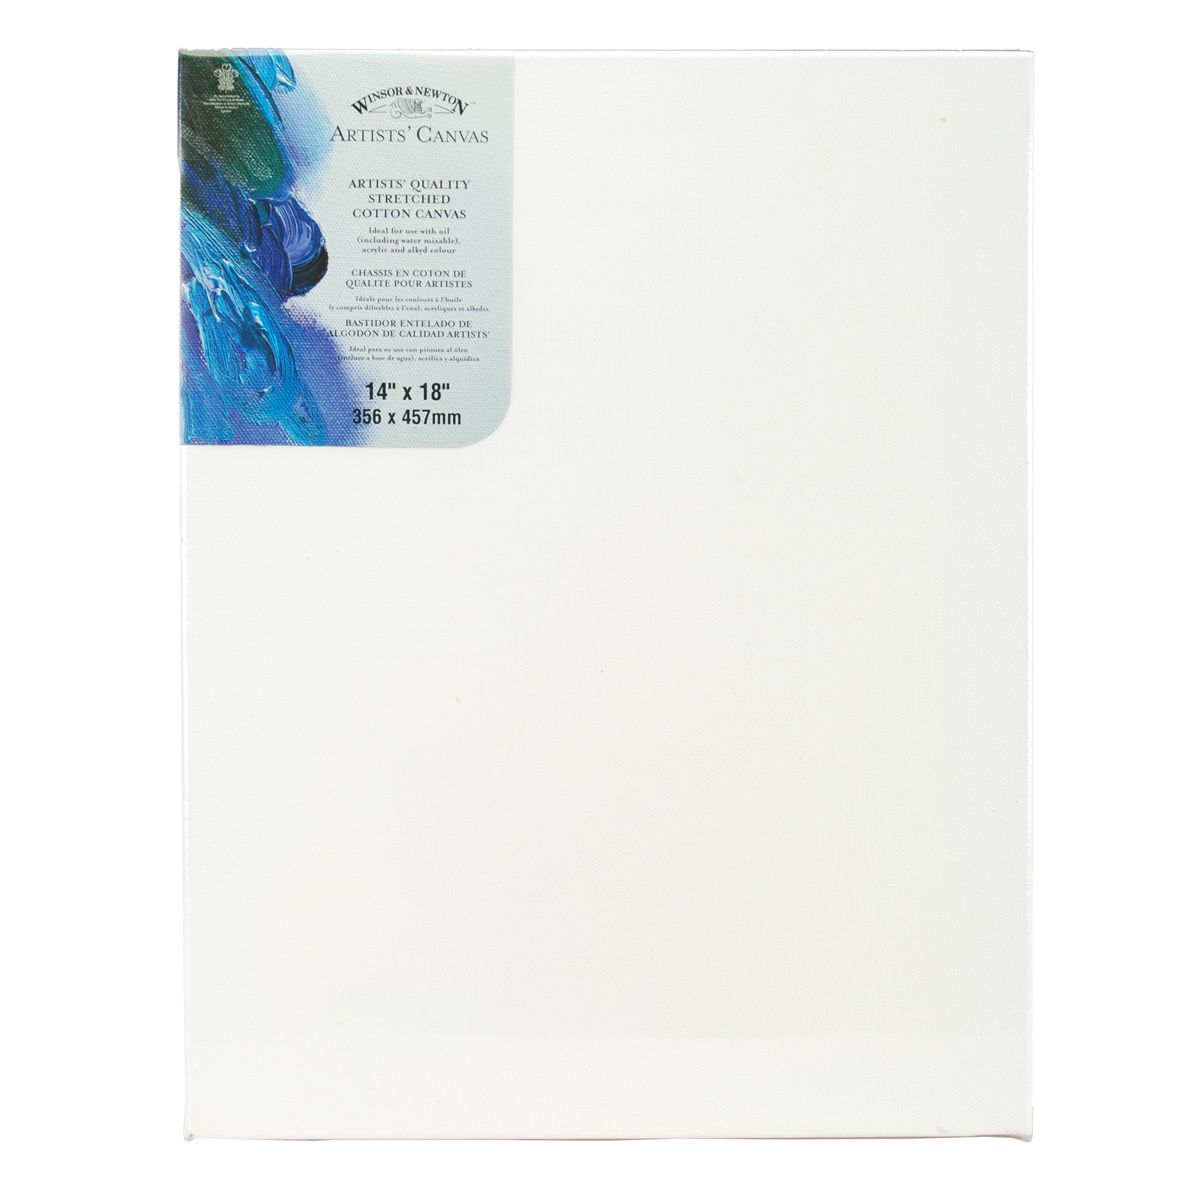 Winsor Newton Artists' Quality Stretched Canvas, 14"X18"